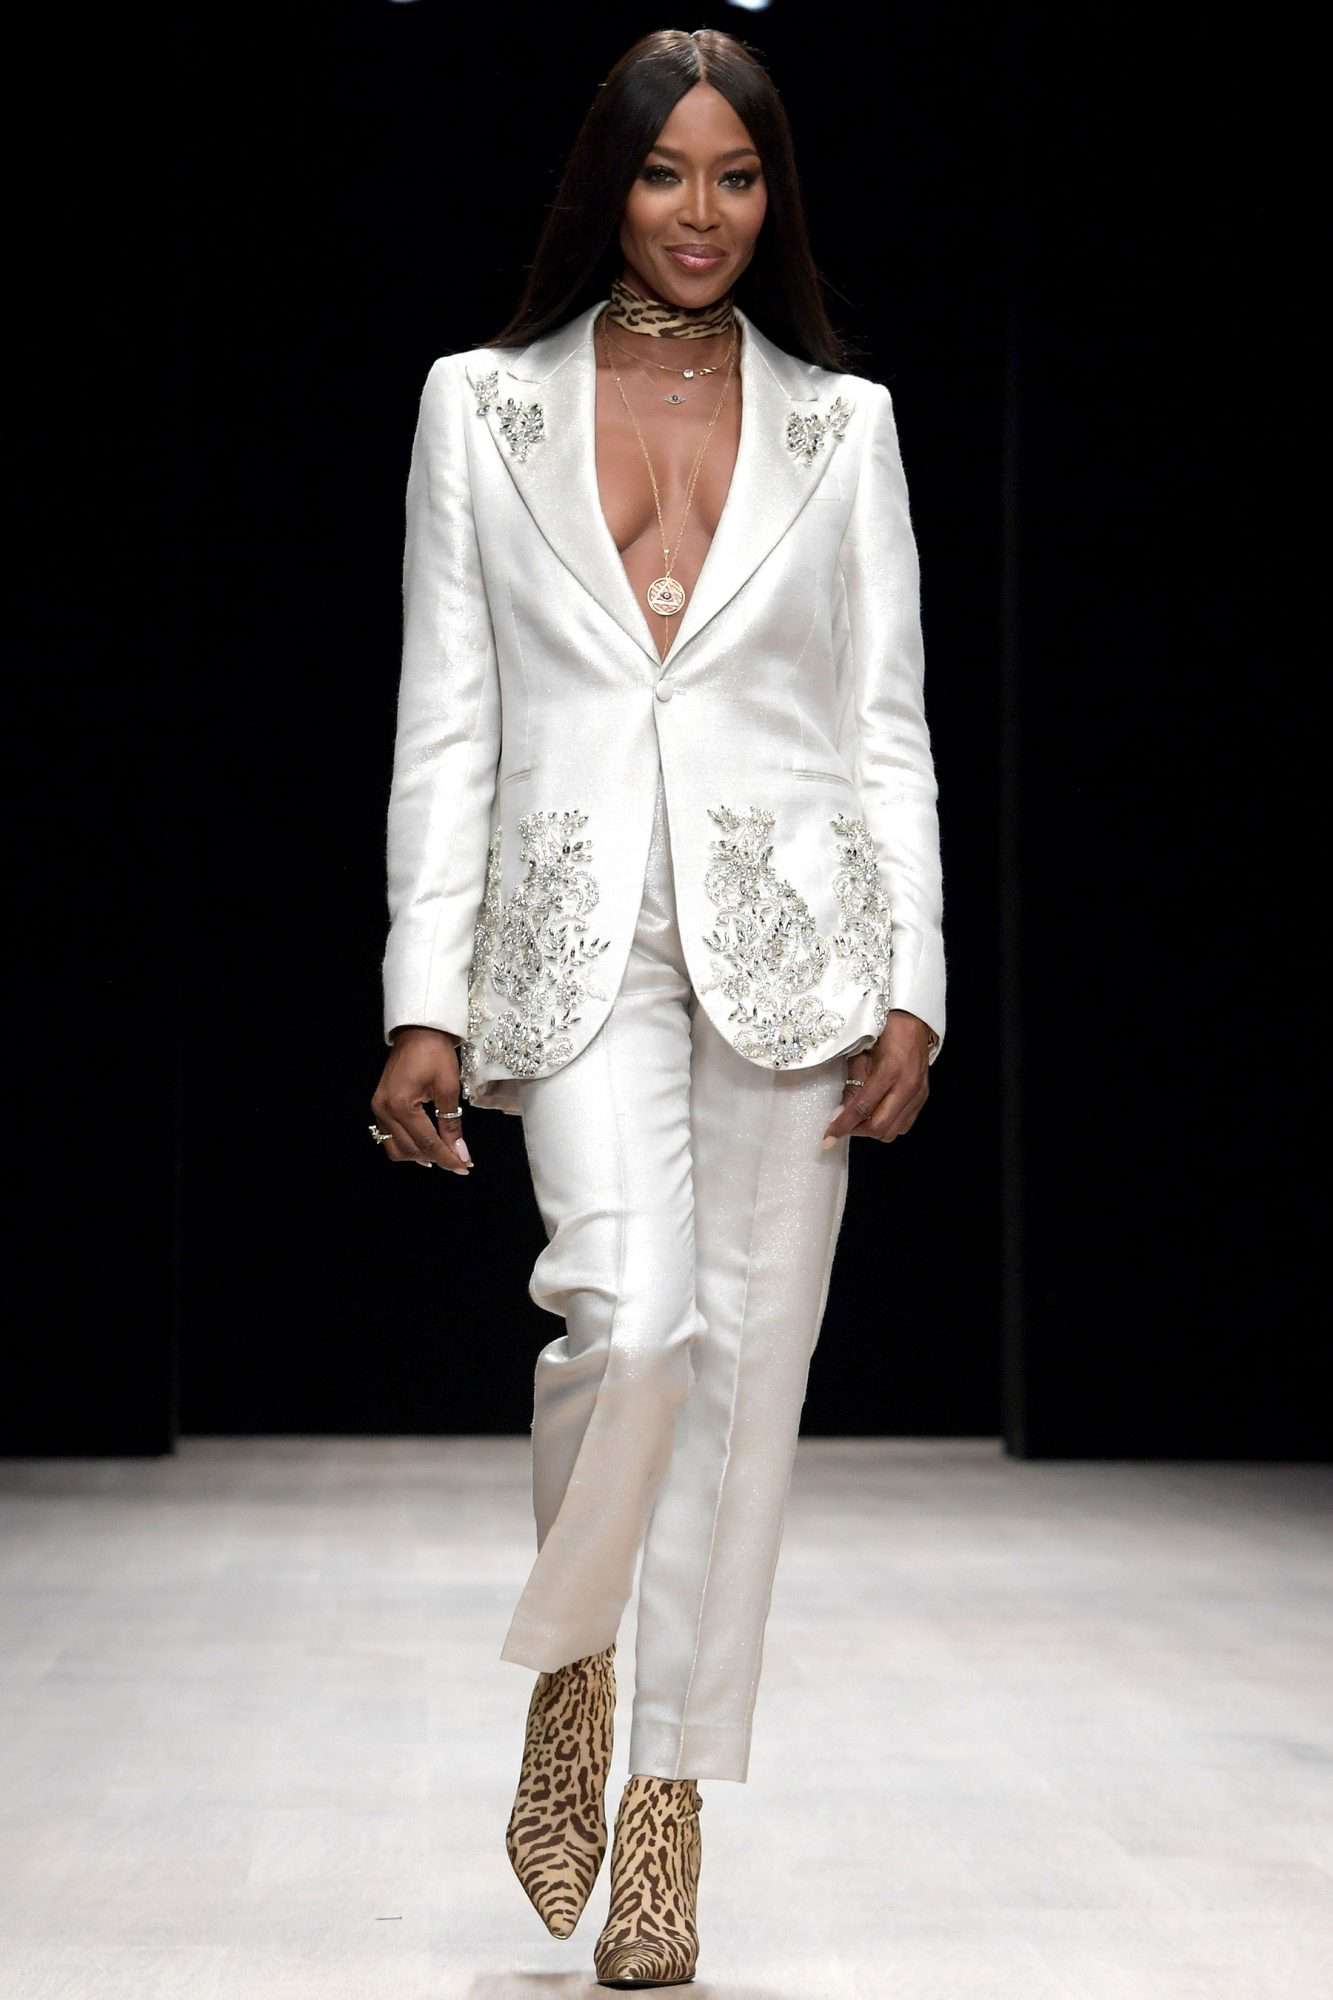 Naomi Campbell attends day one of Arise Fashion Week